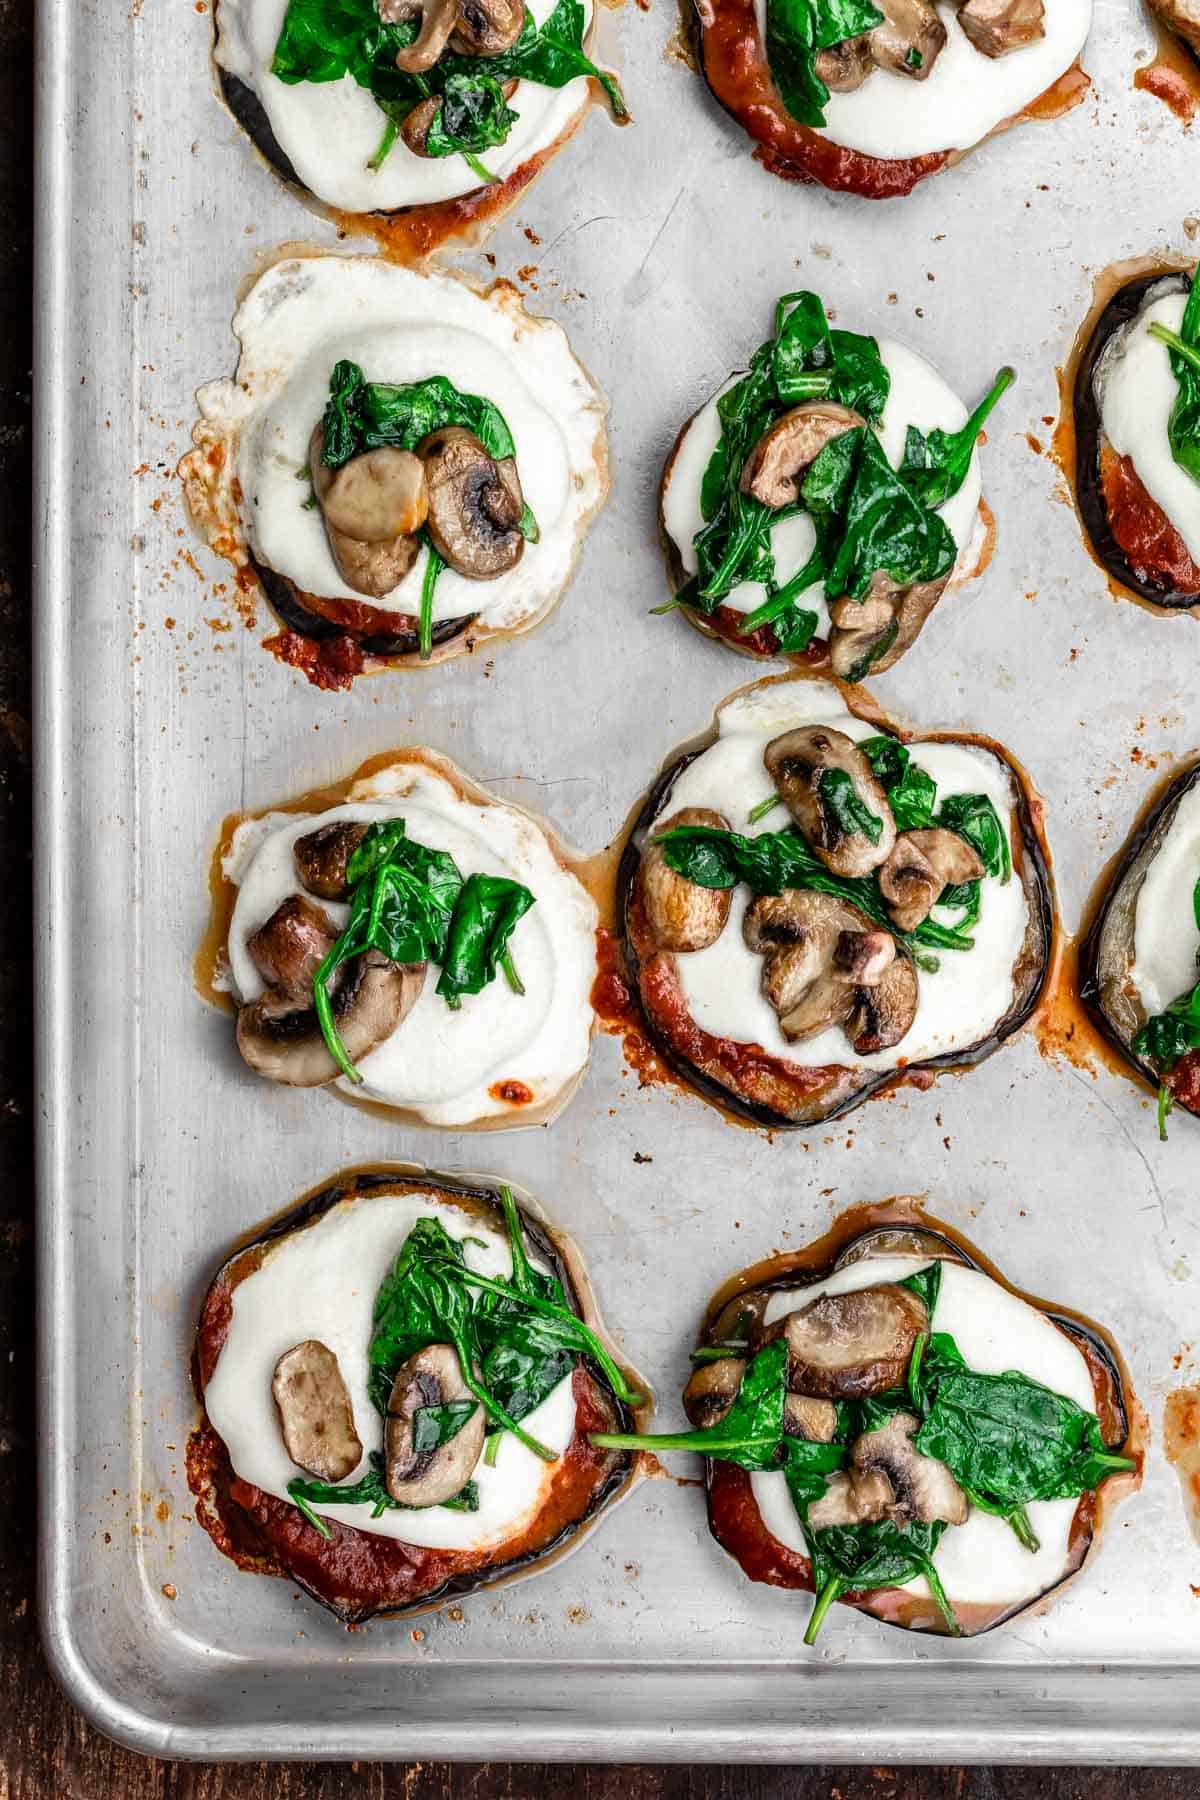 Roasted eggplant pizza with mozzarella, mushrooms and spinach